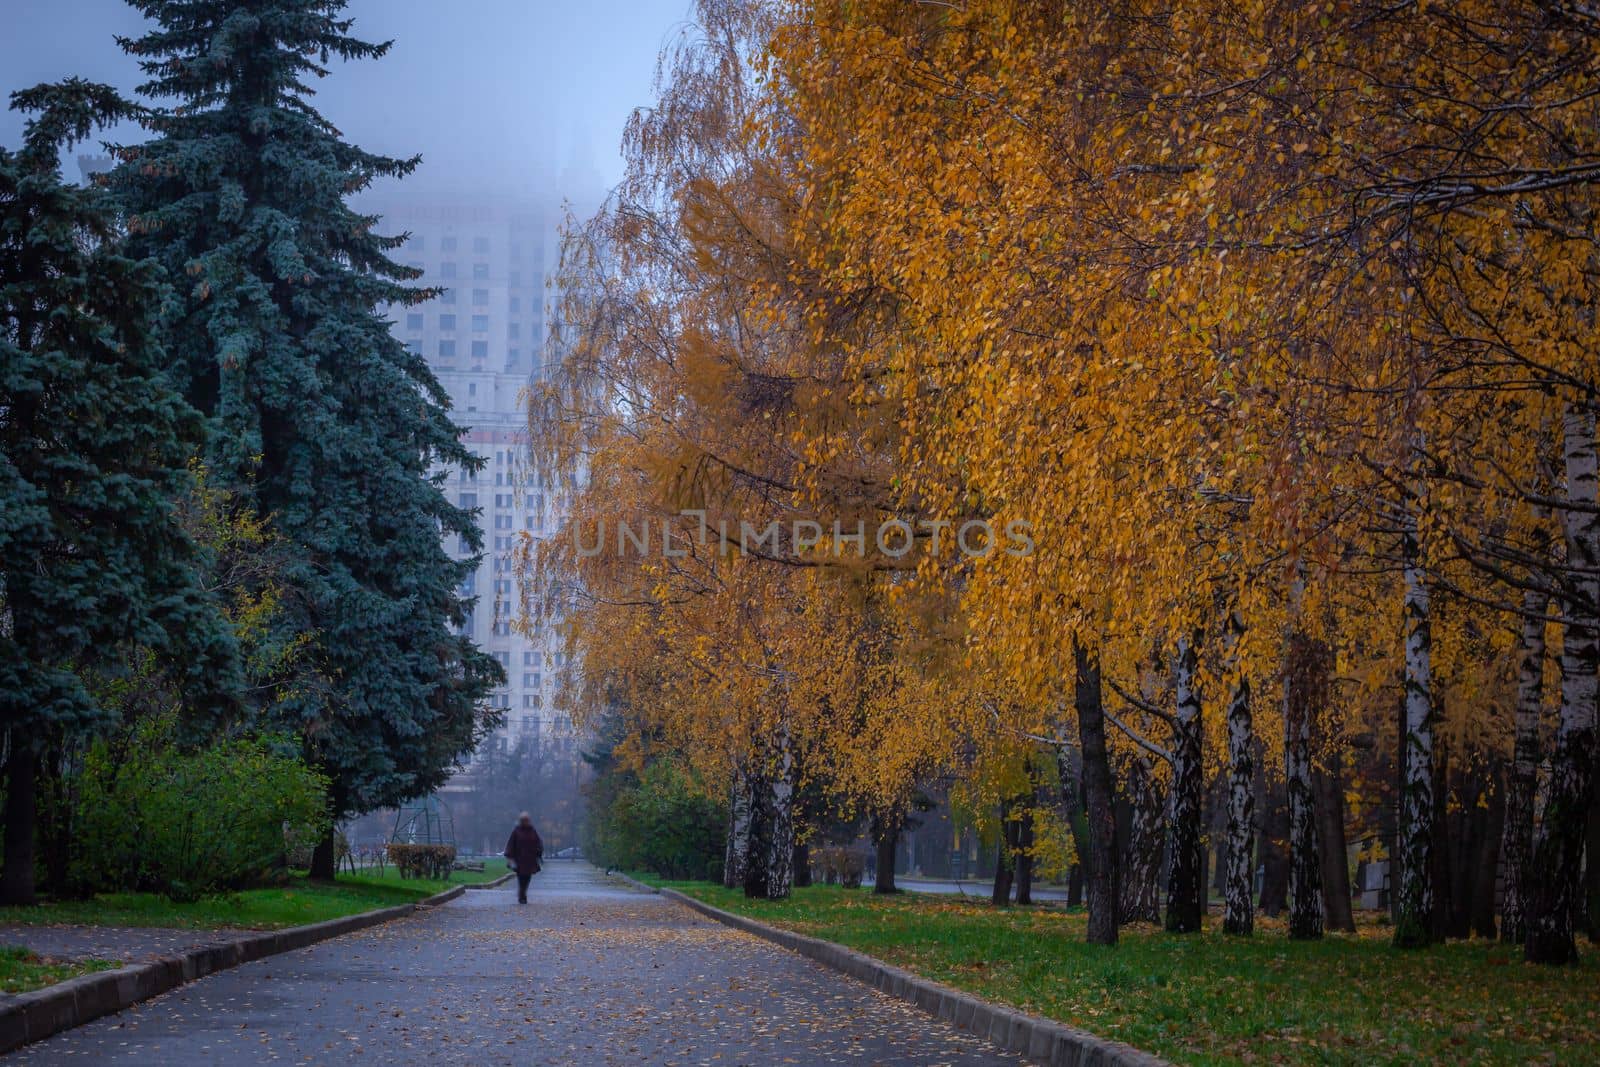 Rain in Moscow, woman walking with one umbrella on city street near red square at autumn, Russia